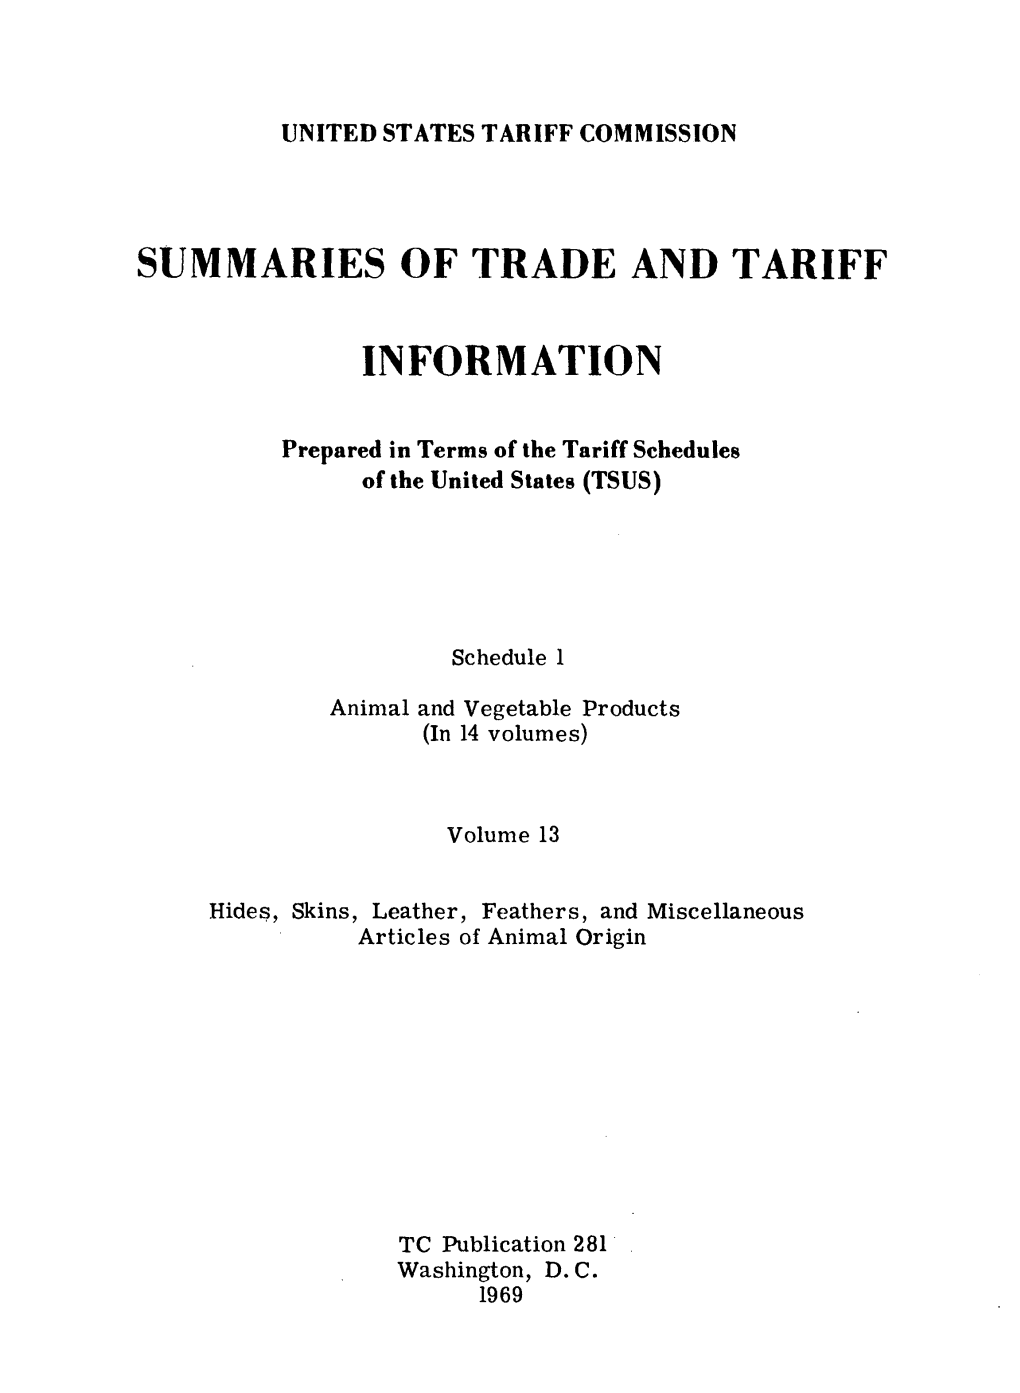 Summaries of Trade and Tariff Information by Schedules